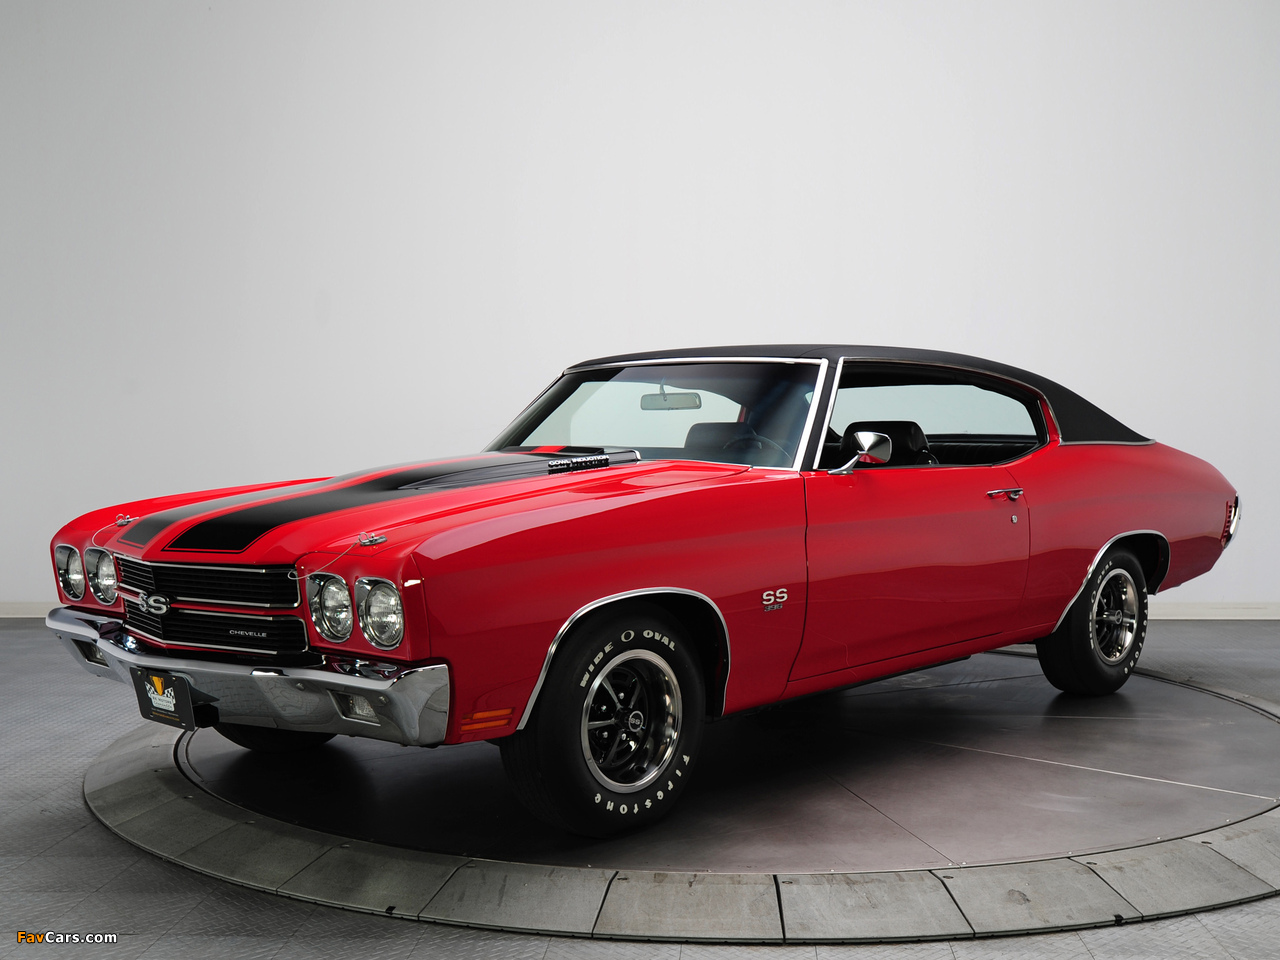 Chevrolet Chevelle SS 396 Hardtop Coupe 1970 pictures (1280 x 960)